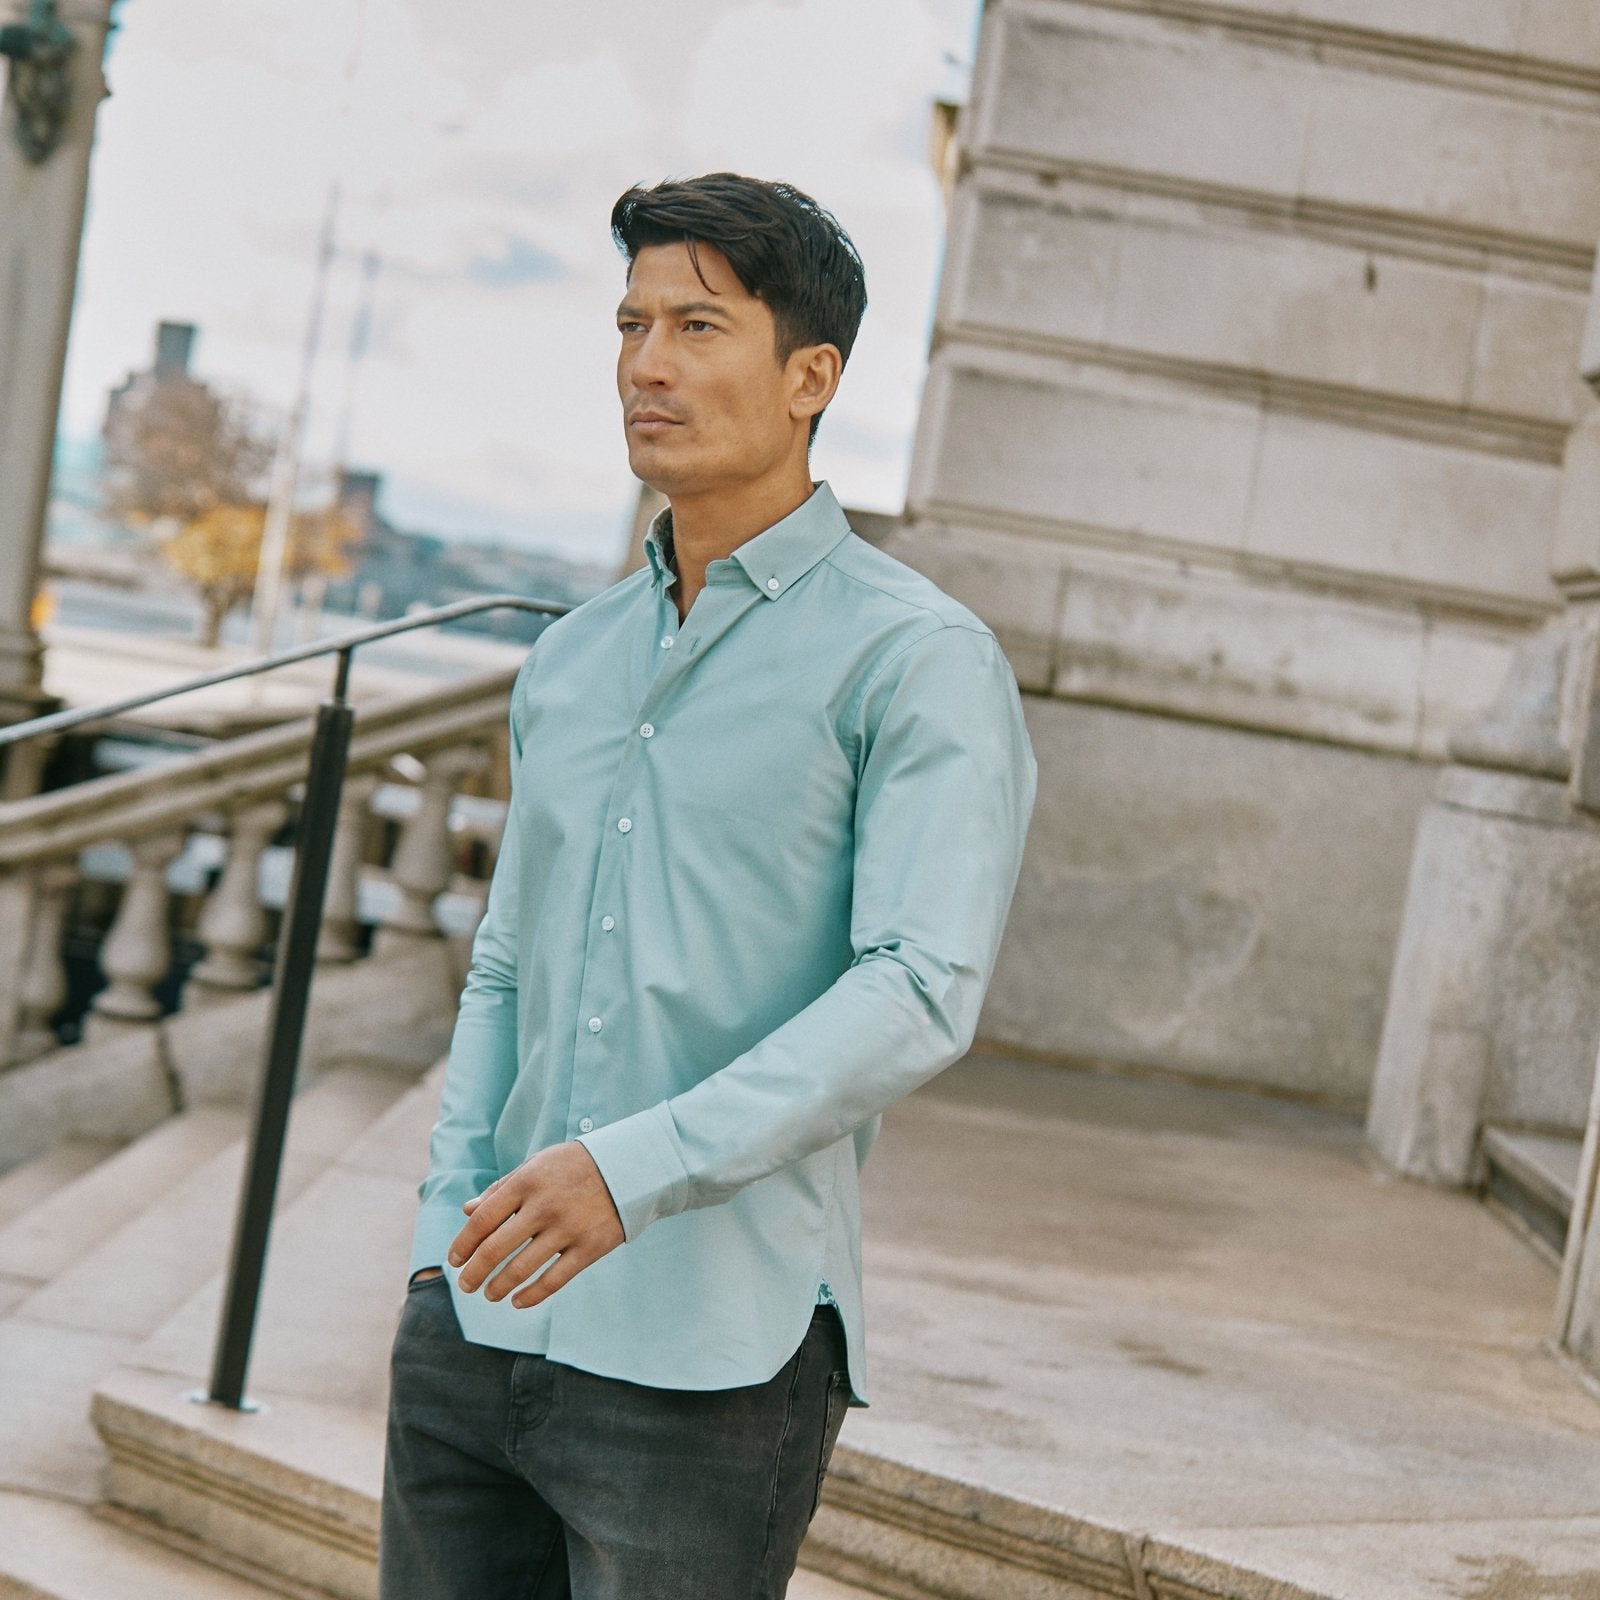 Teal Oxford with Stoned Skulls Accents Button-Down Shirt - Blake Mill